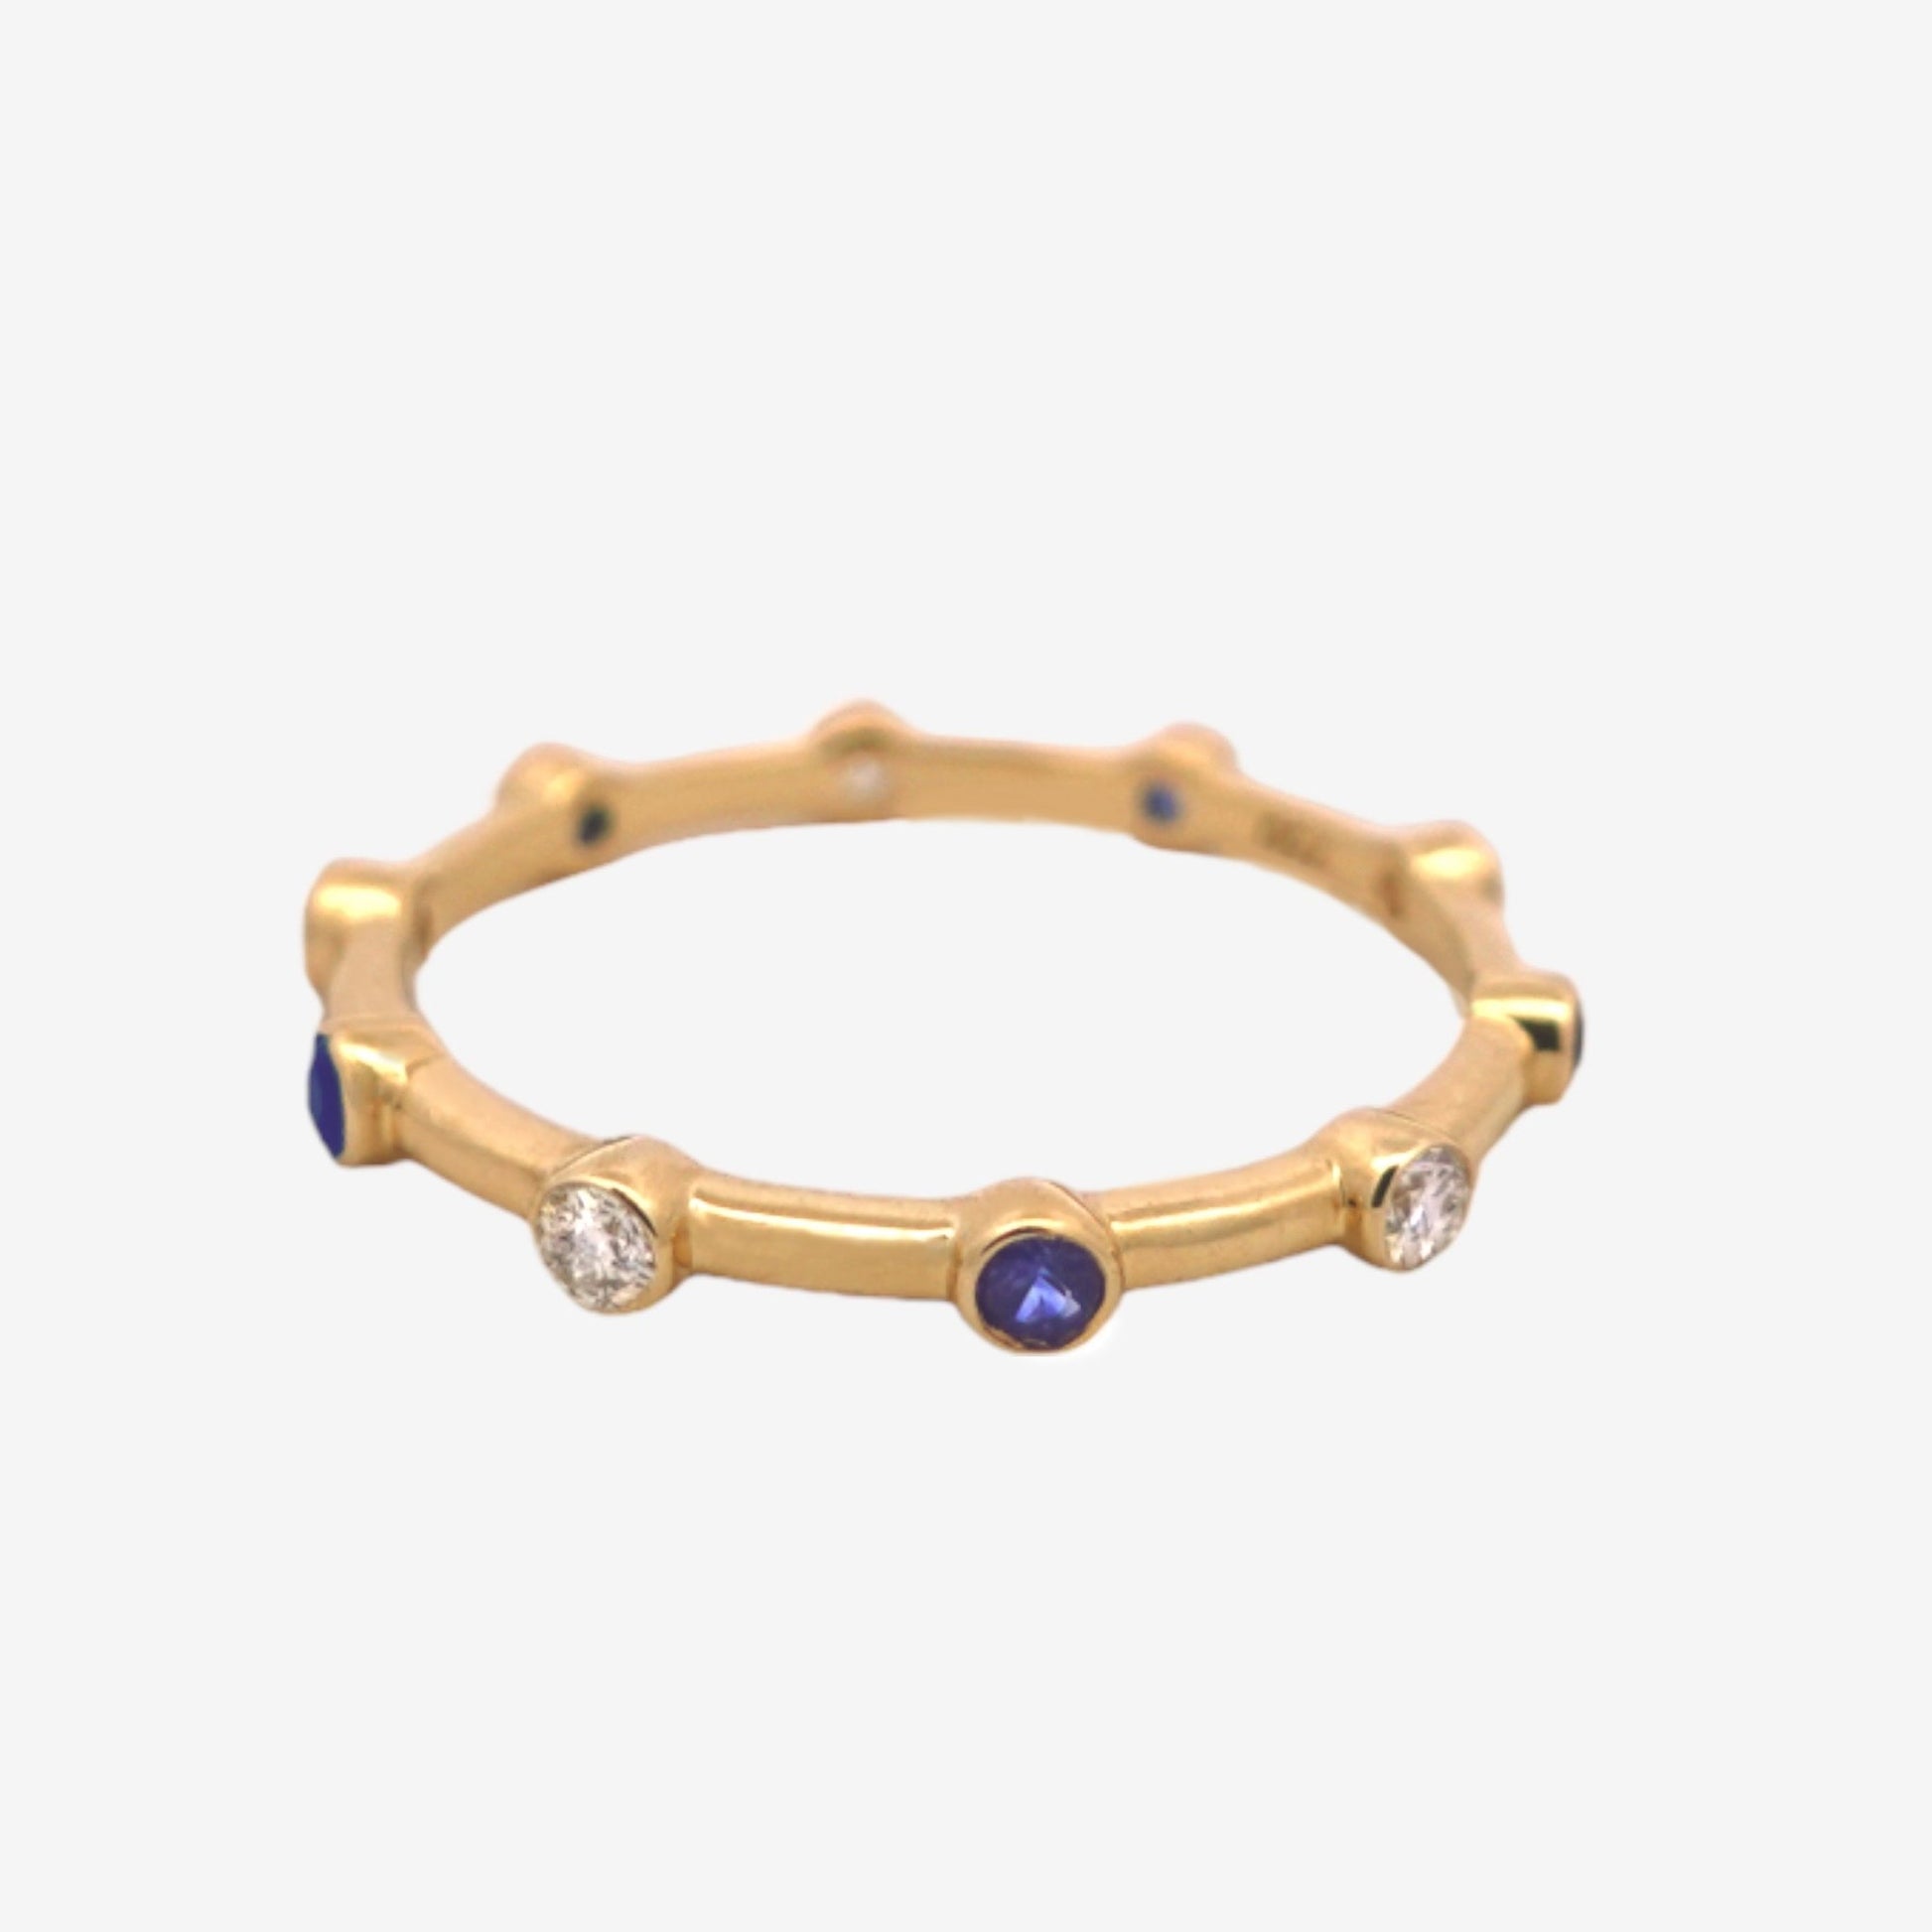 Dotted Ring in Diamond and Sapphire - 18k Gold - Lynor